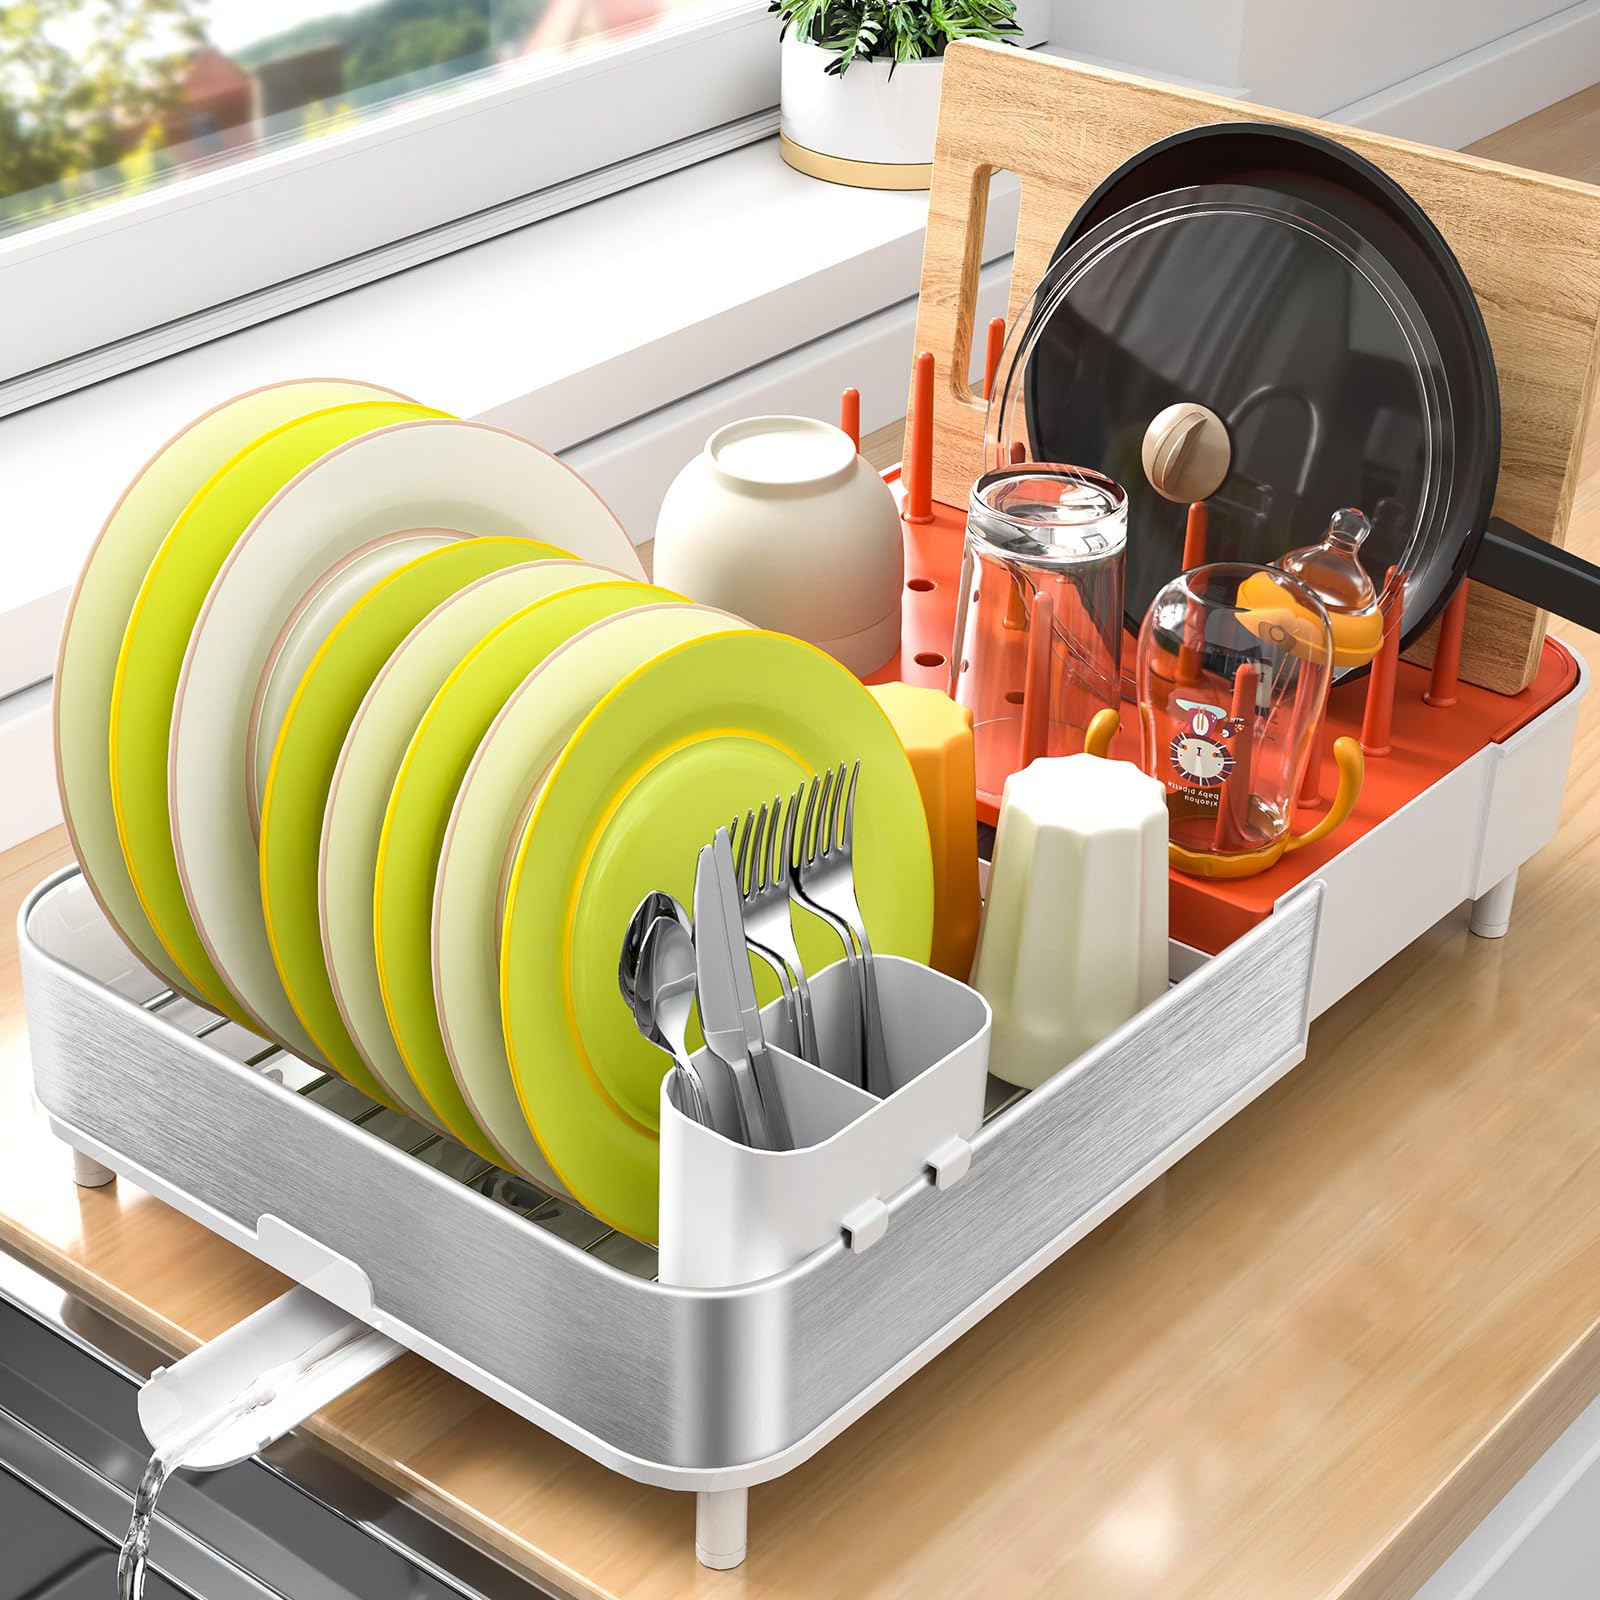 TOOLF Dish Rack, Extendable Dish Drainer, Modern Dish Drying Rack 2 in 1 Design. Expandable Drain Board in Sink, Stainless Steel Dish Racks for Kitchen Counter Utensils,Plates,Pans,Pots Organizer